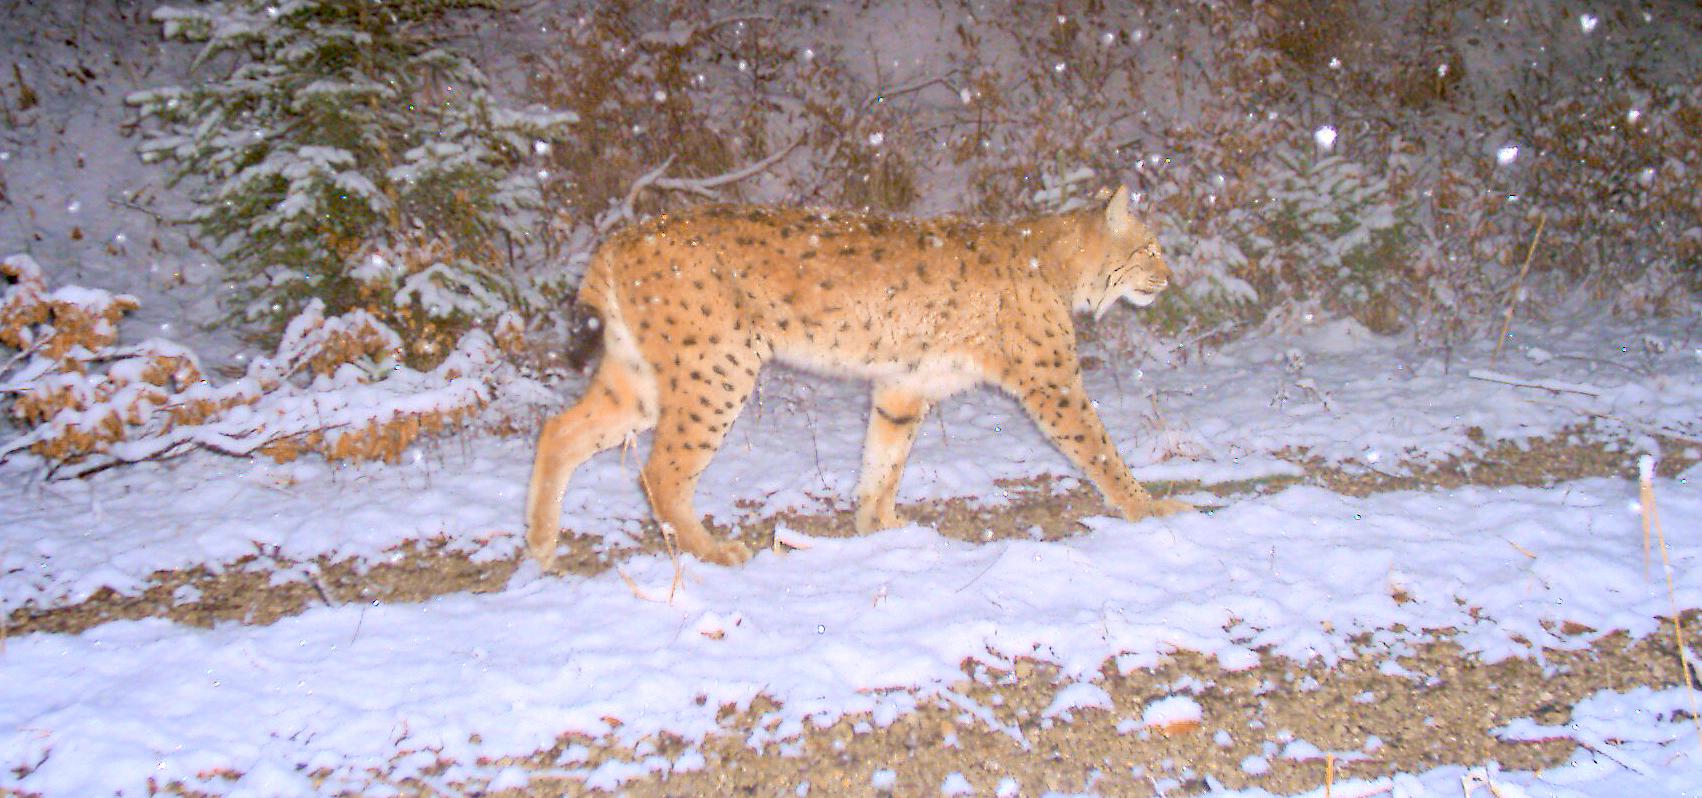 Night-time photo trap image shows a lynx running along a snow-covered path